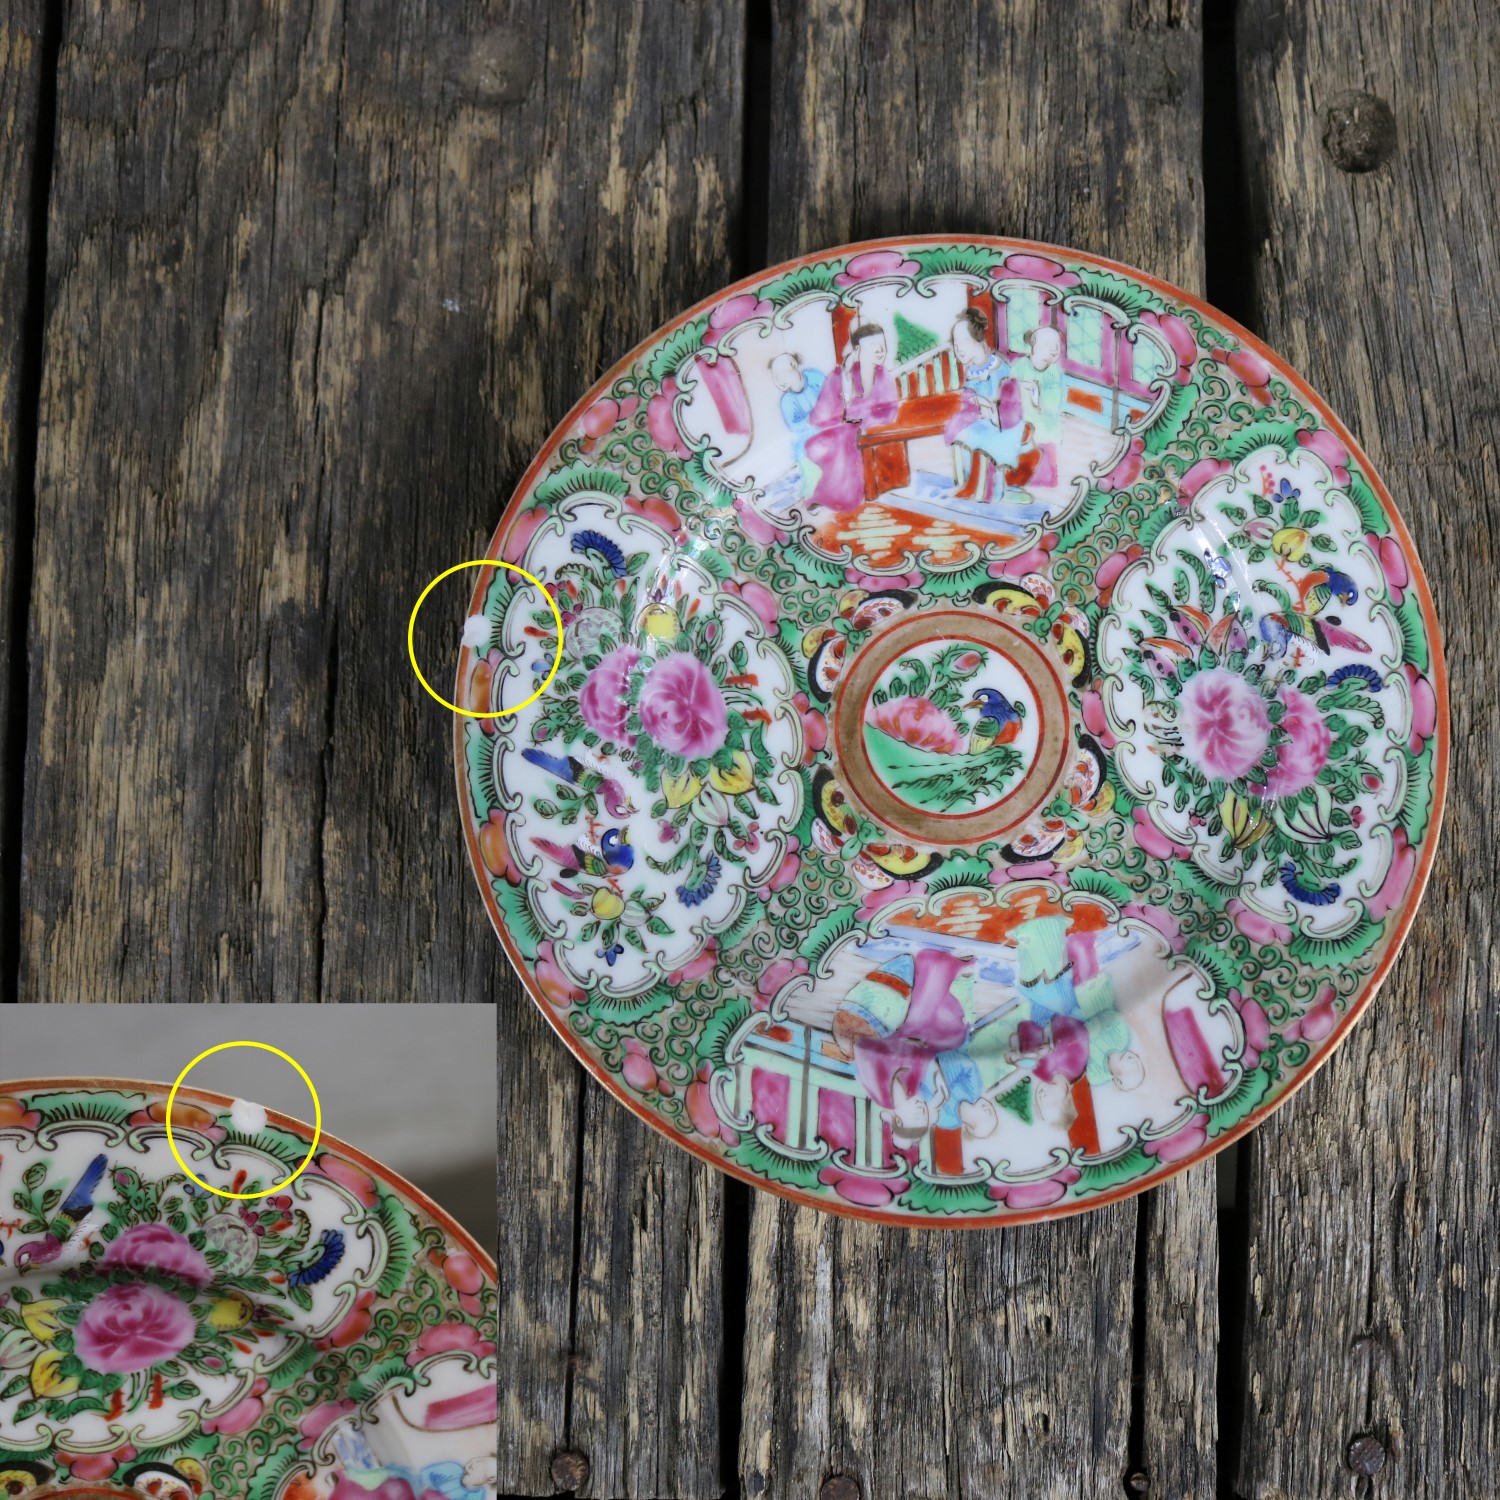 Antique Chinese Qing Rose Medallion Porcelain 7.25 Inch Plates Set of 5